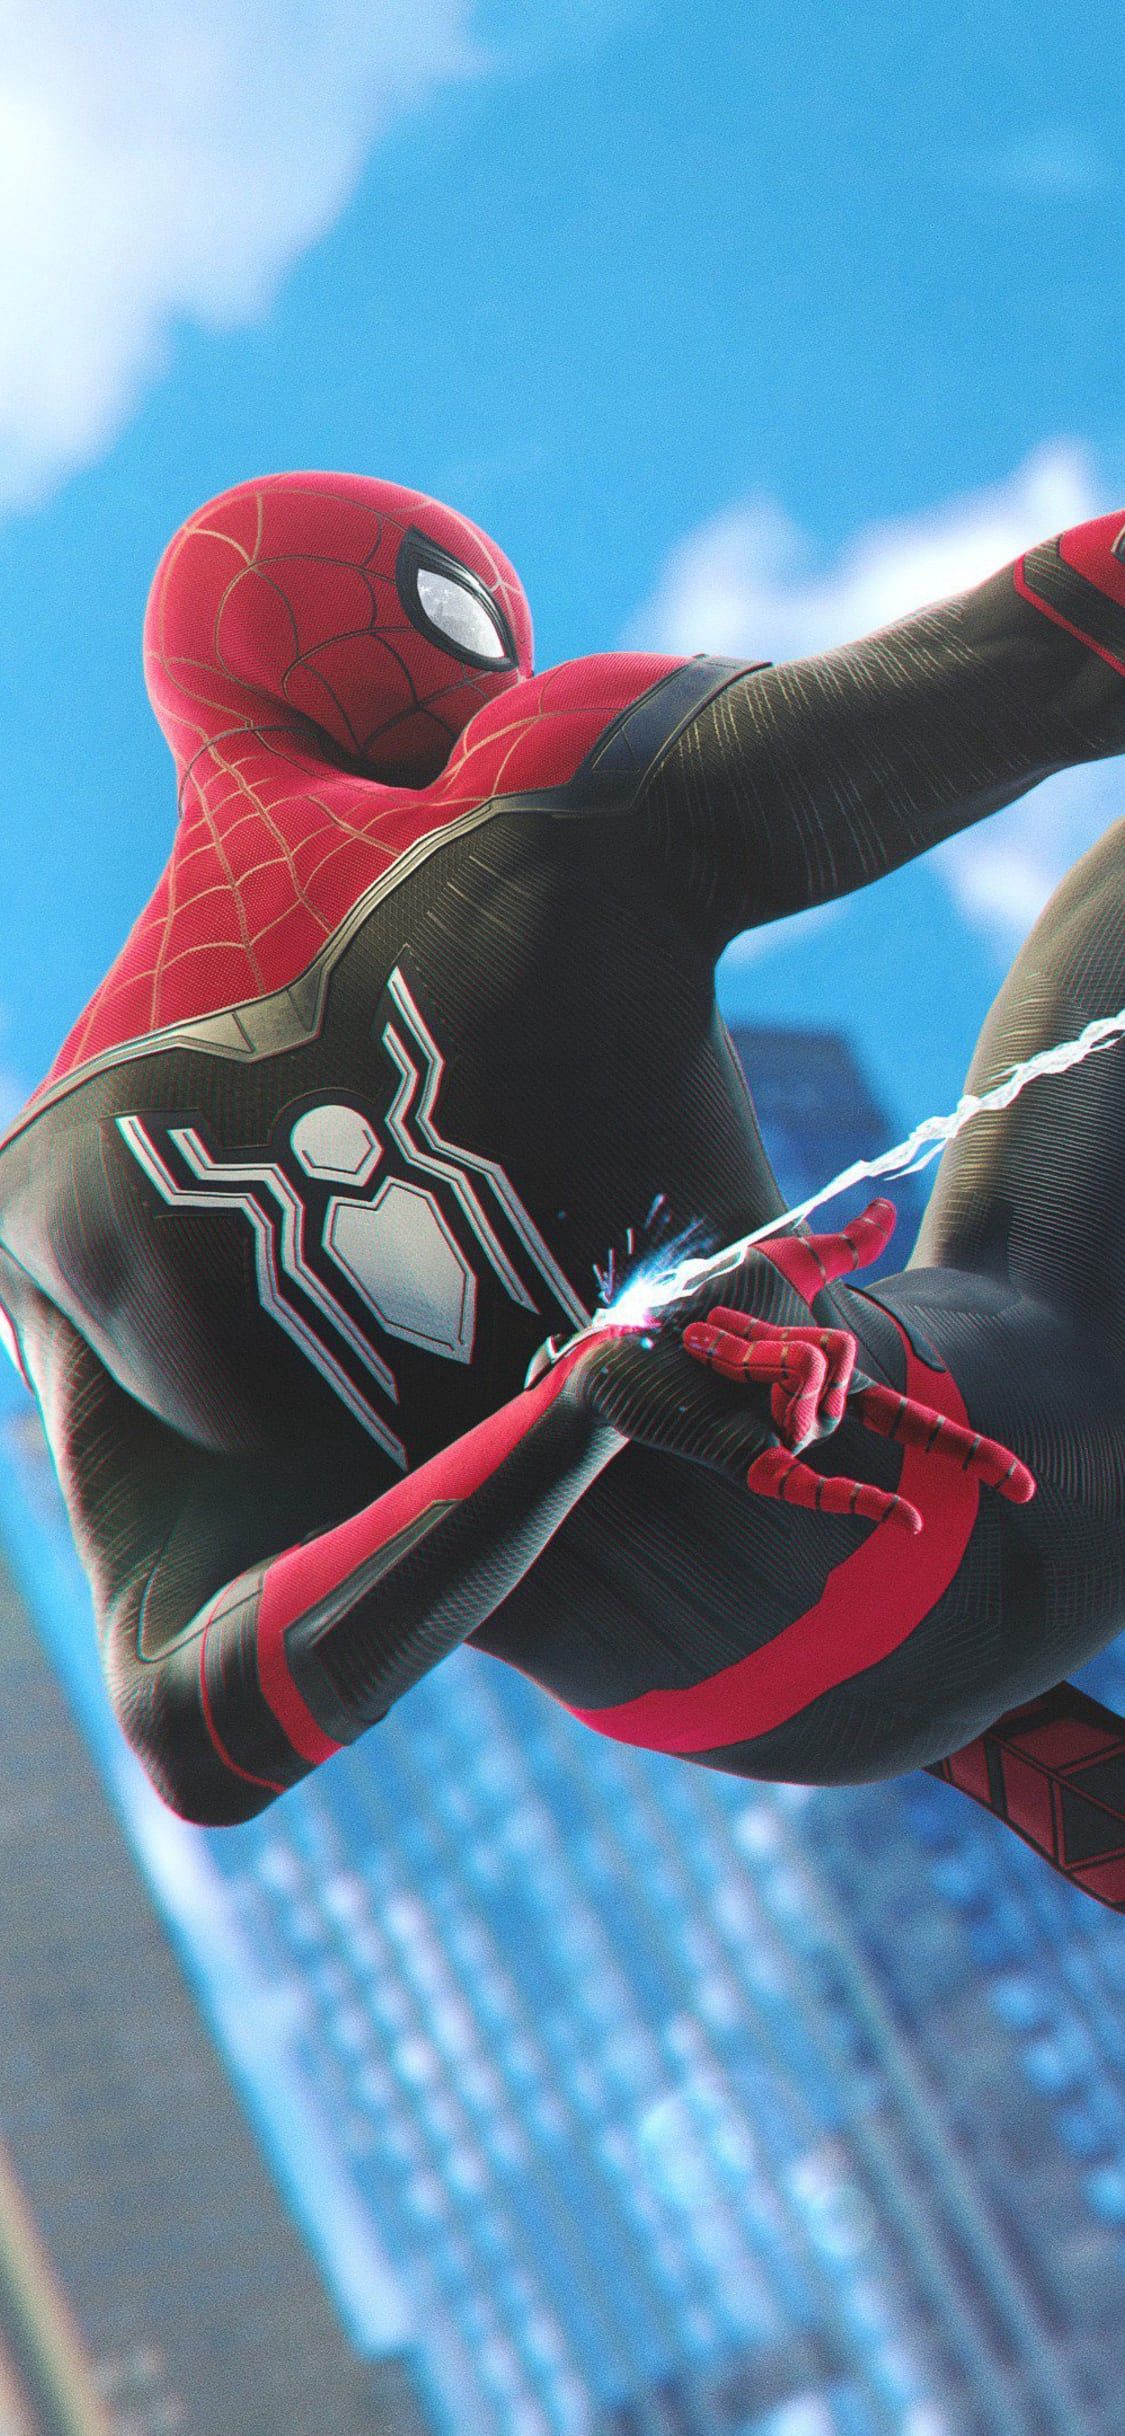 Spider-Man Cool Wallpapers - Wallpaper Cave